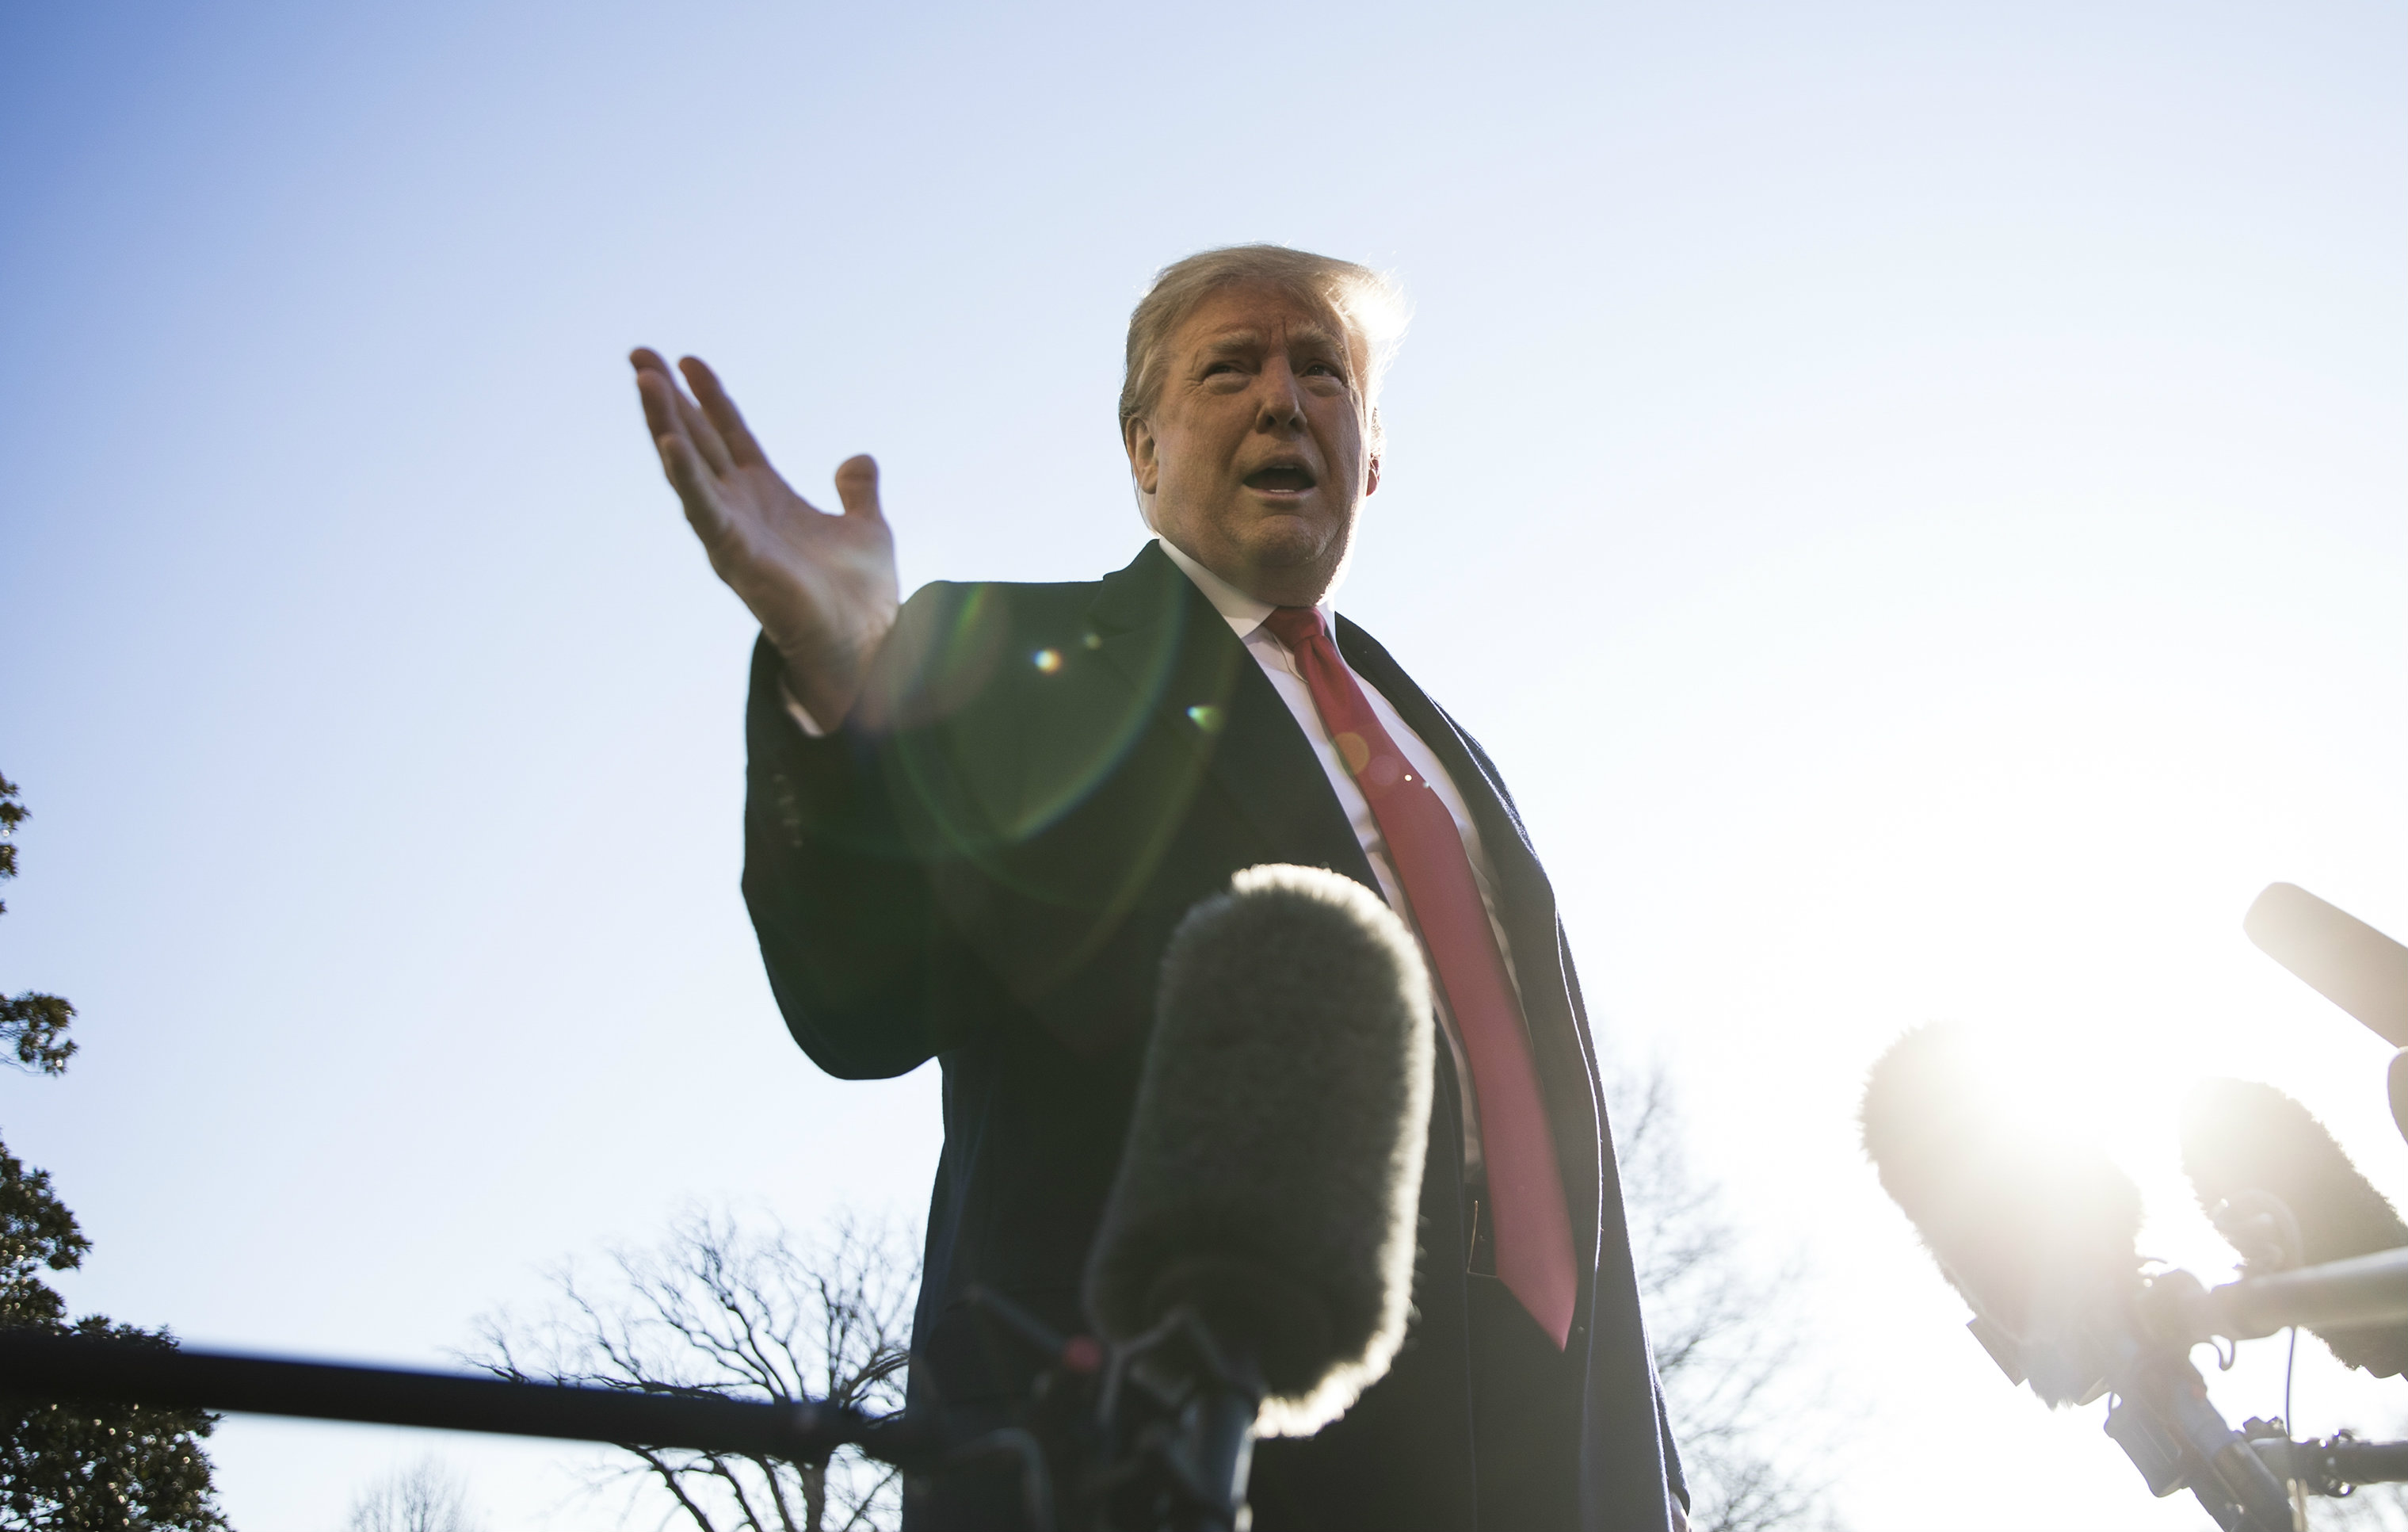 Donald Trump speaks to reporters on Sunday as he departs from the White House for Camp David, where he will meet with senior staff to discuss the shutdown and border security. 